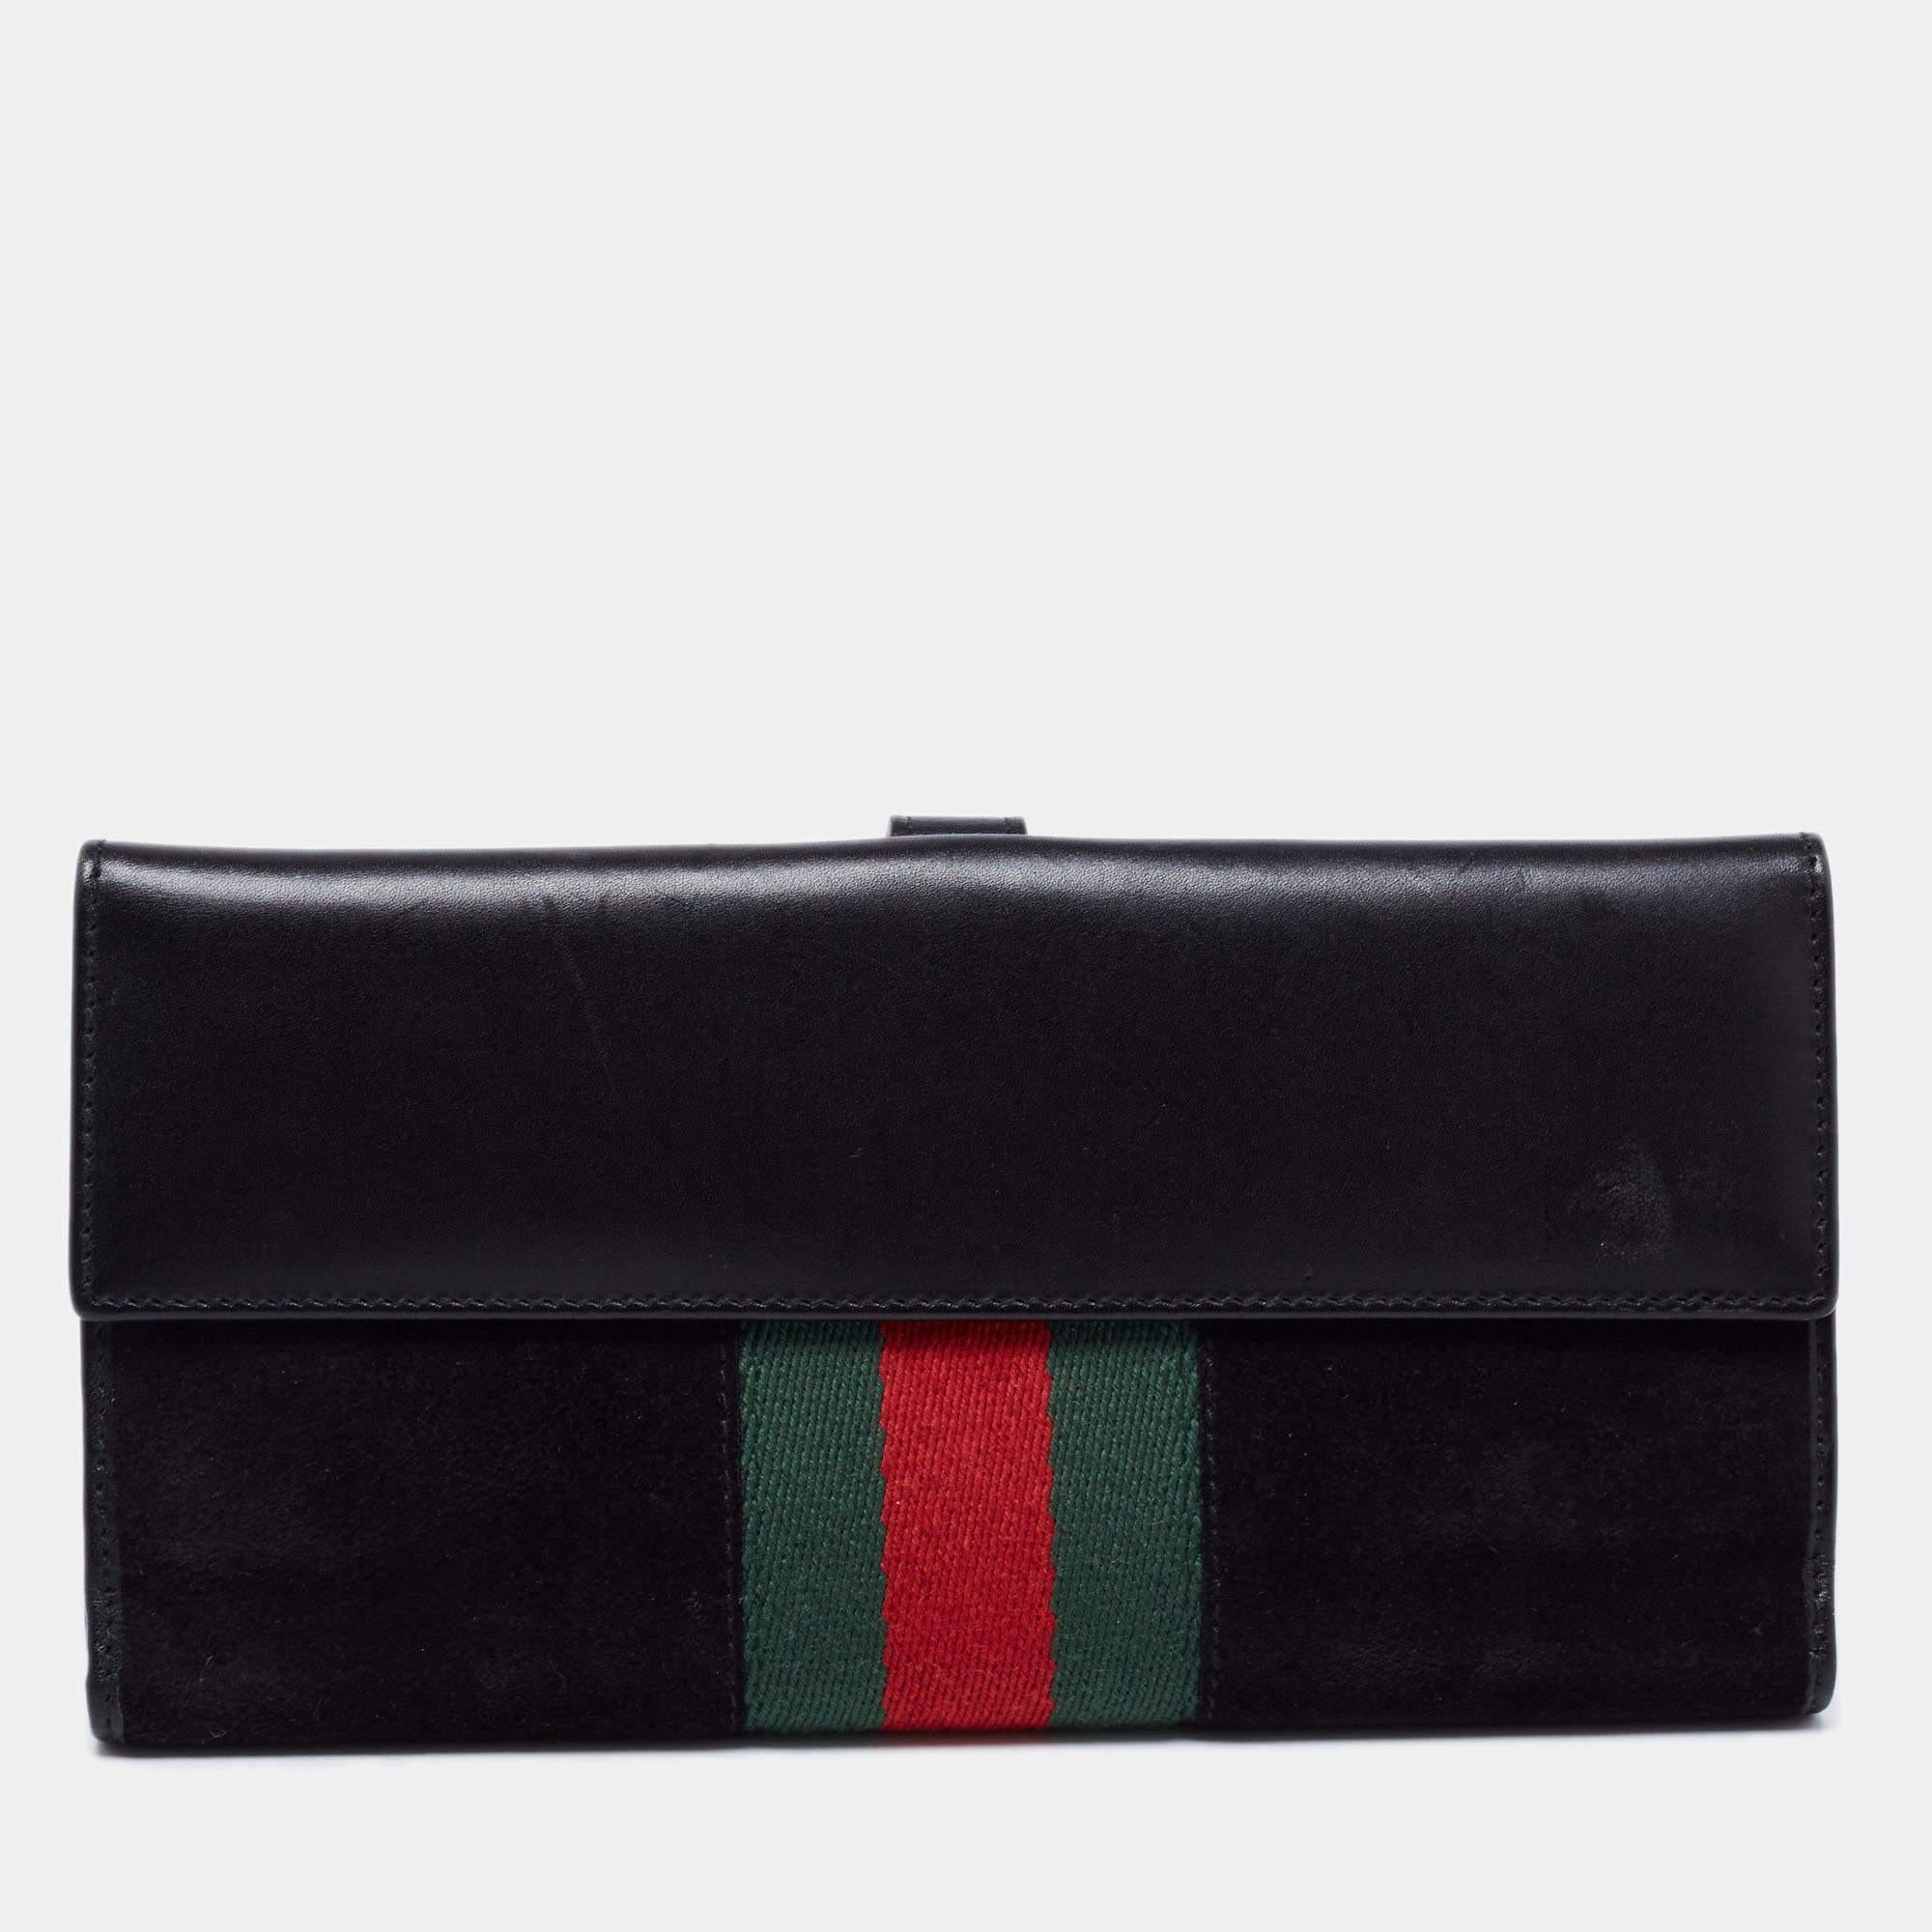 Infused with signature elements, this Gucci wallet is an accessory of utility. It is crafted from suede and canvas with a branded black-tone lock on the front and a Web stripe on both sides. The leather interior is divided into different